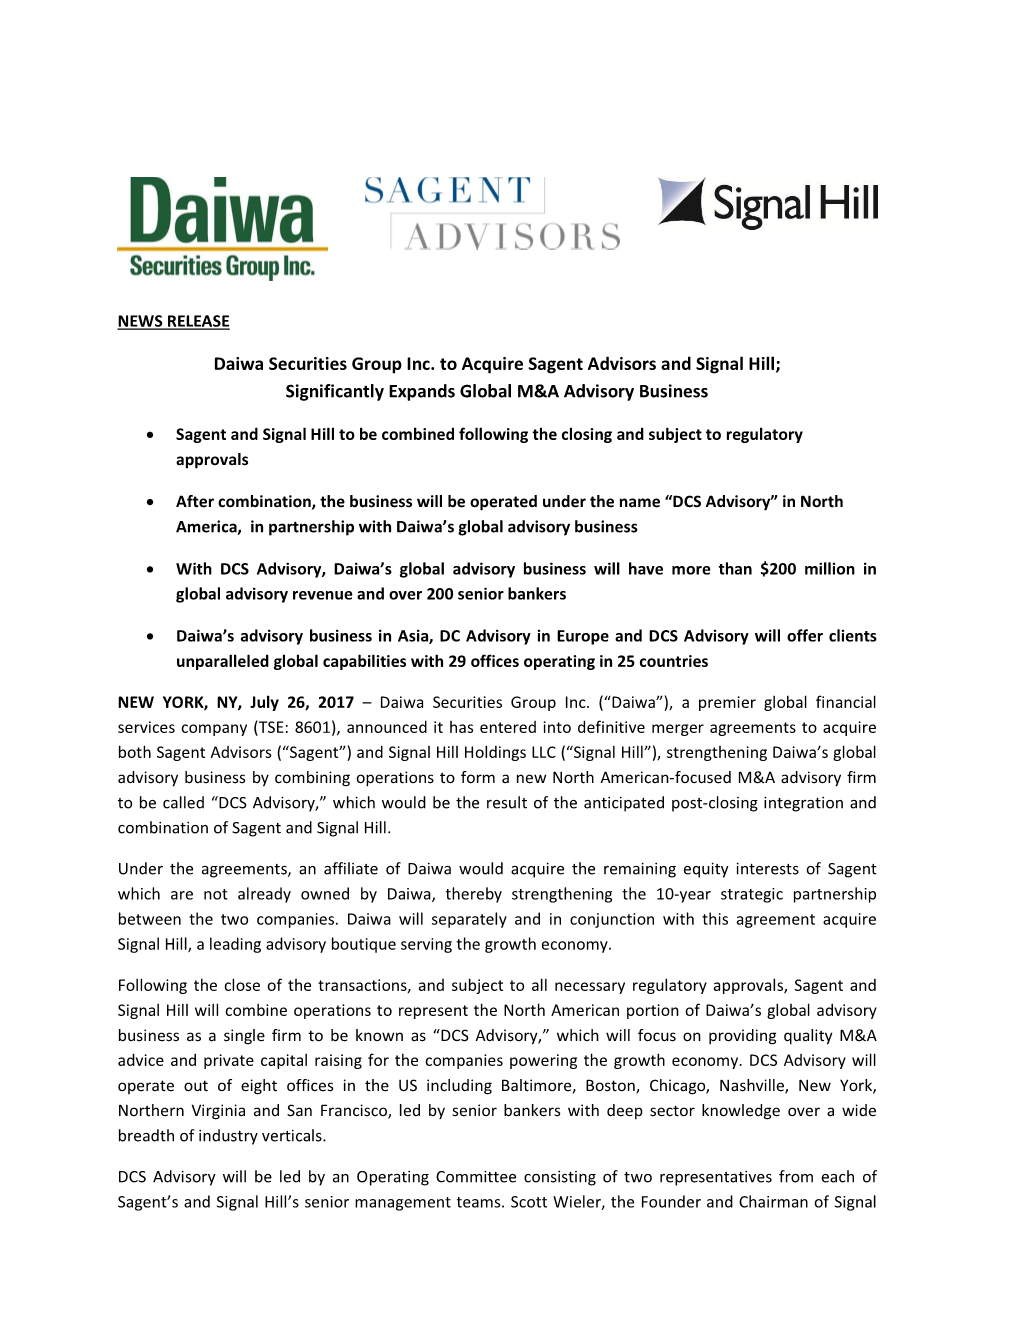 Daiwa Securities Group Inc. to Acquire Sagent Advisors and Signal Hill; Significantly Expands Global M&A Advisory Business